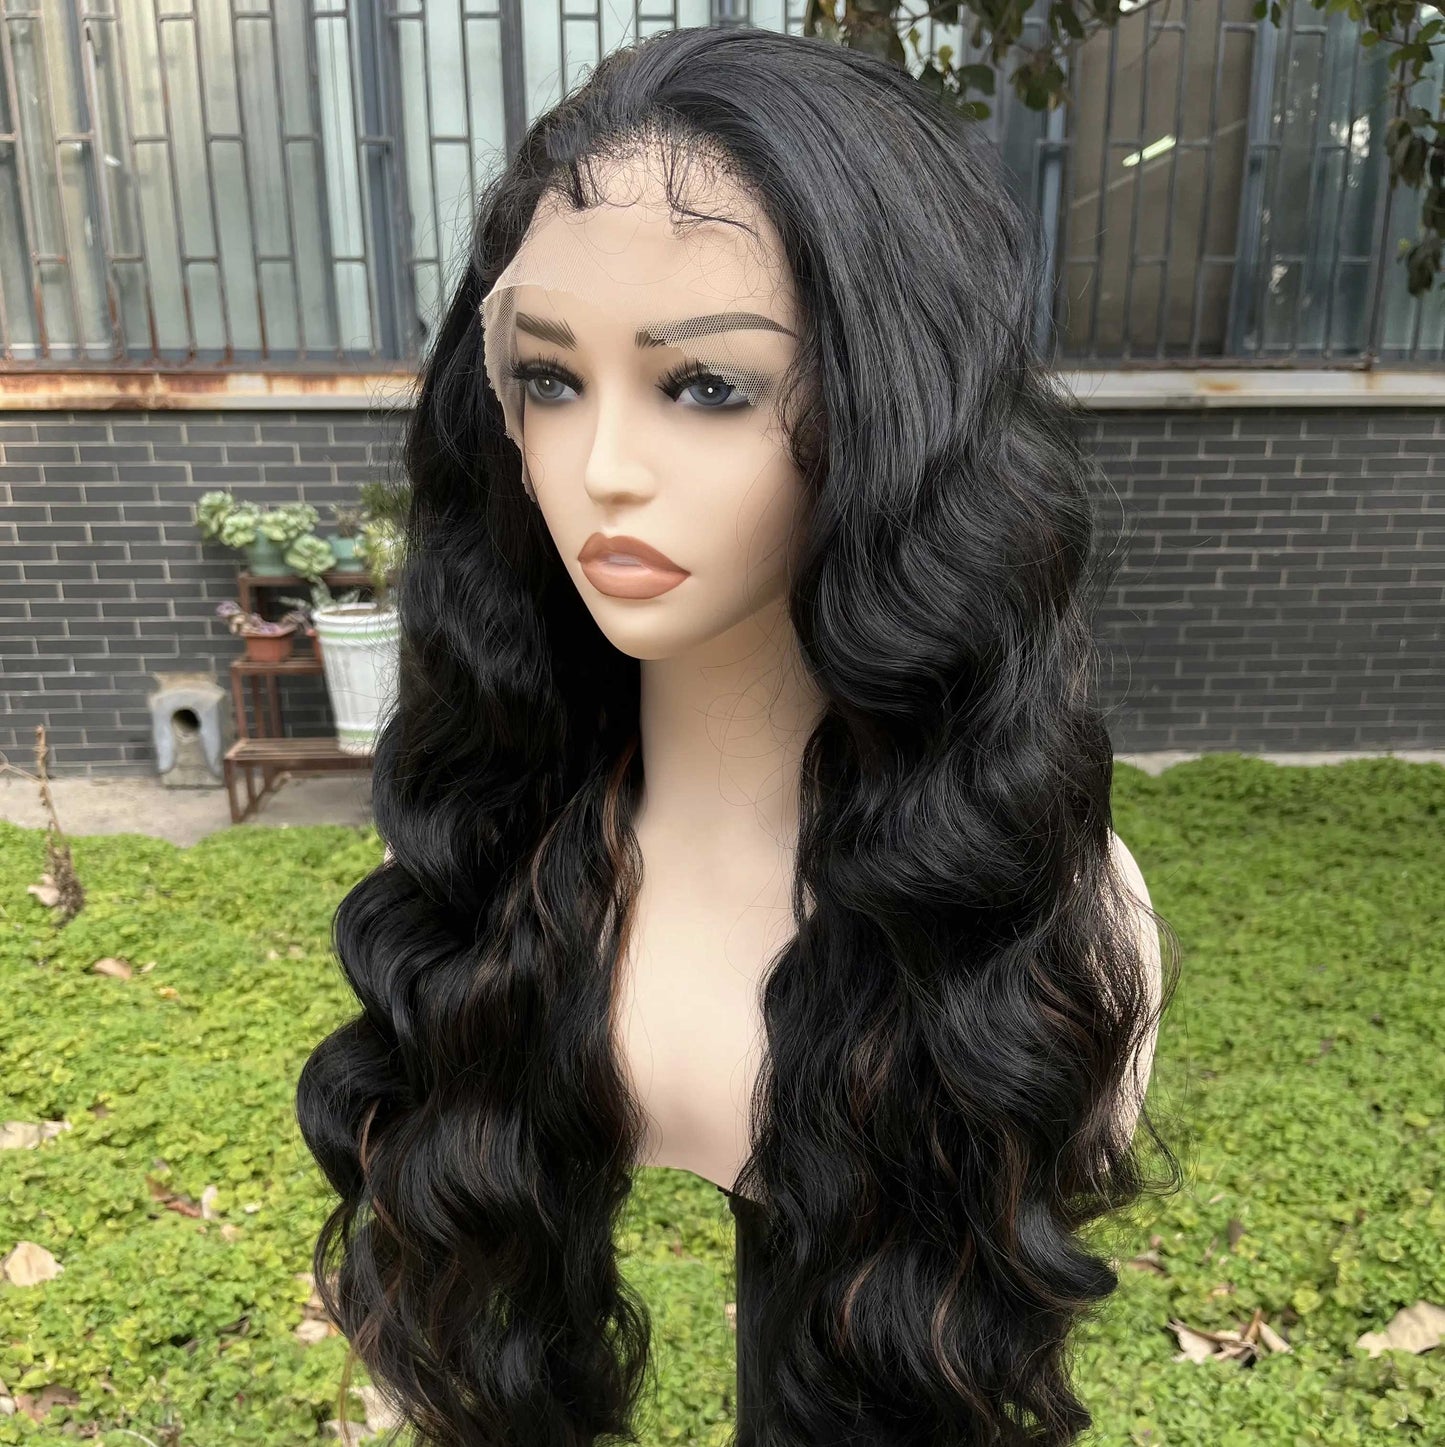 Loose Wave Lace Front Wigs Human Hair HD Lace Frontal Wigs Human Hair Natural Color  16-34 inch